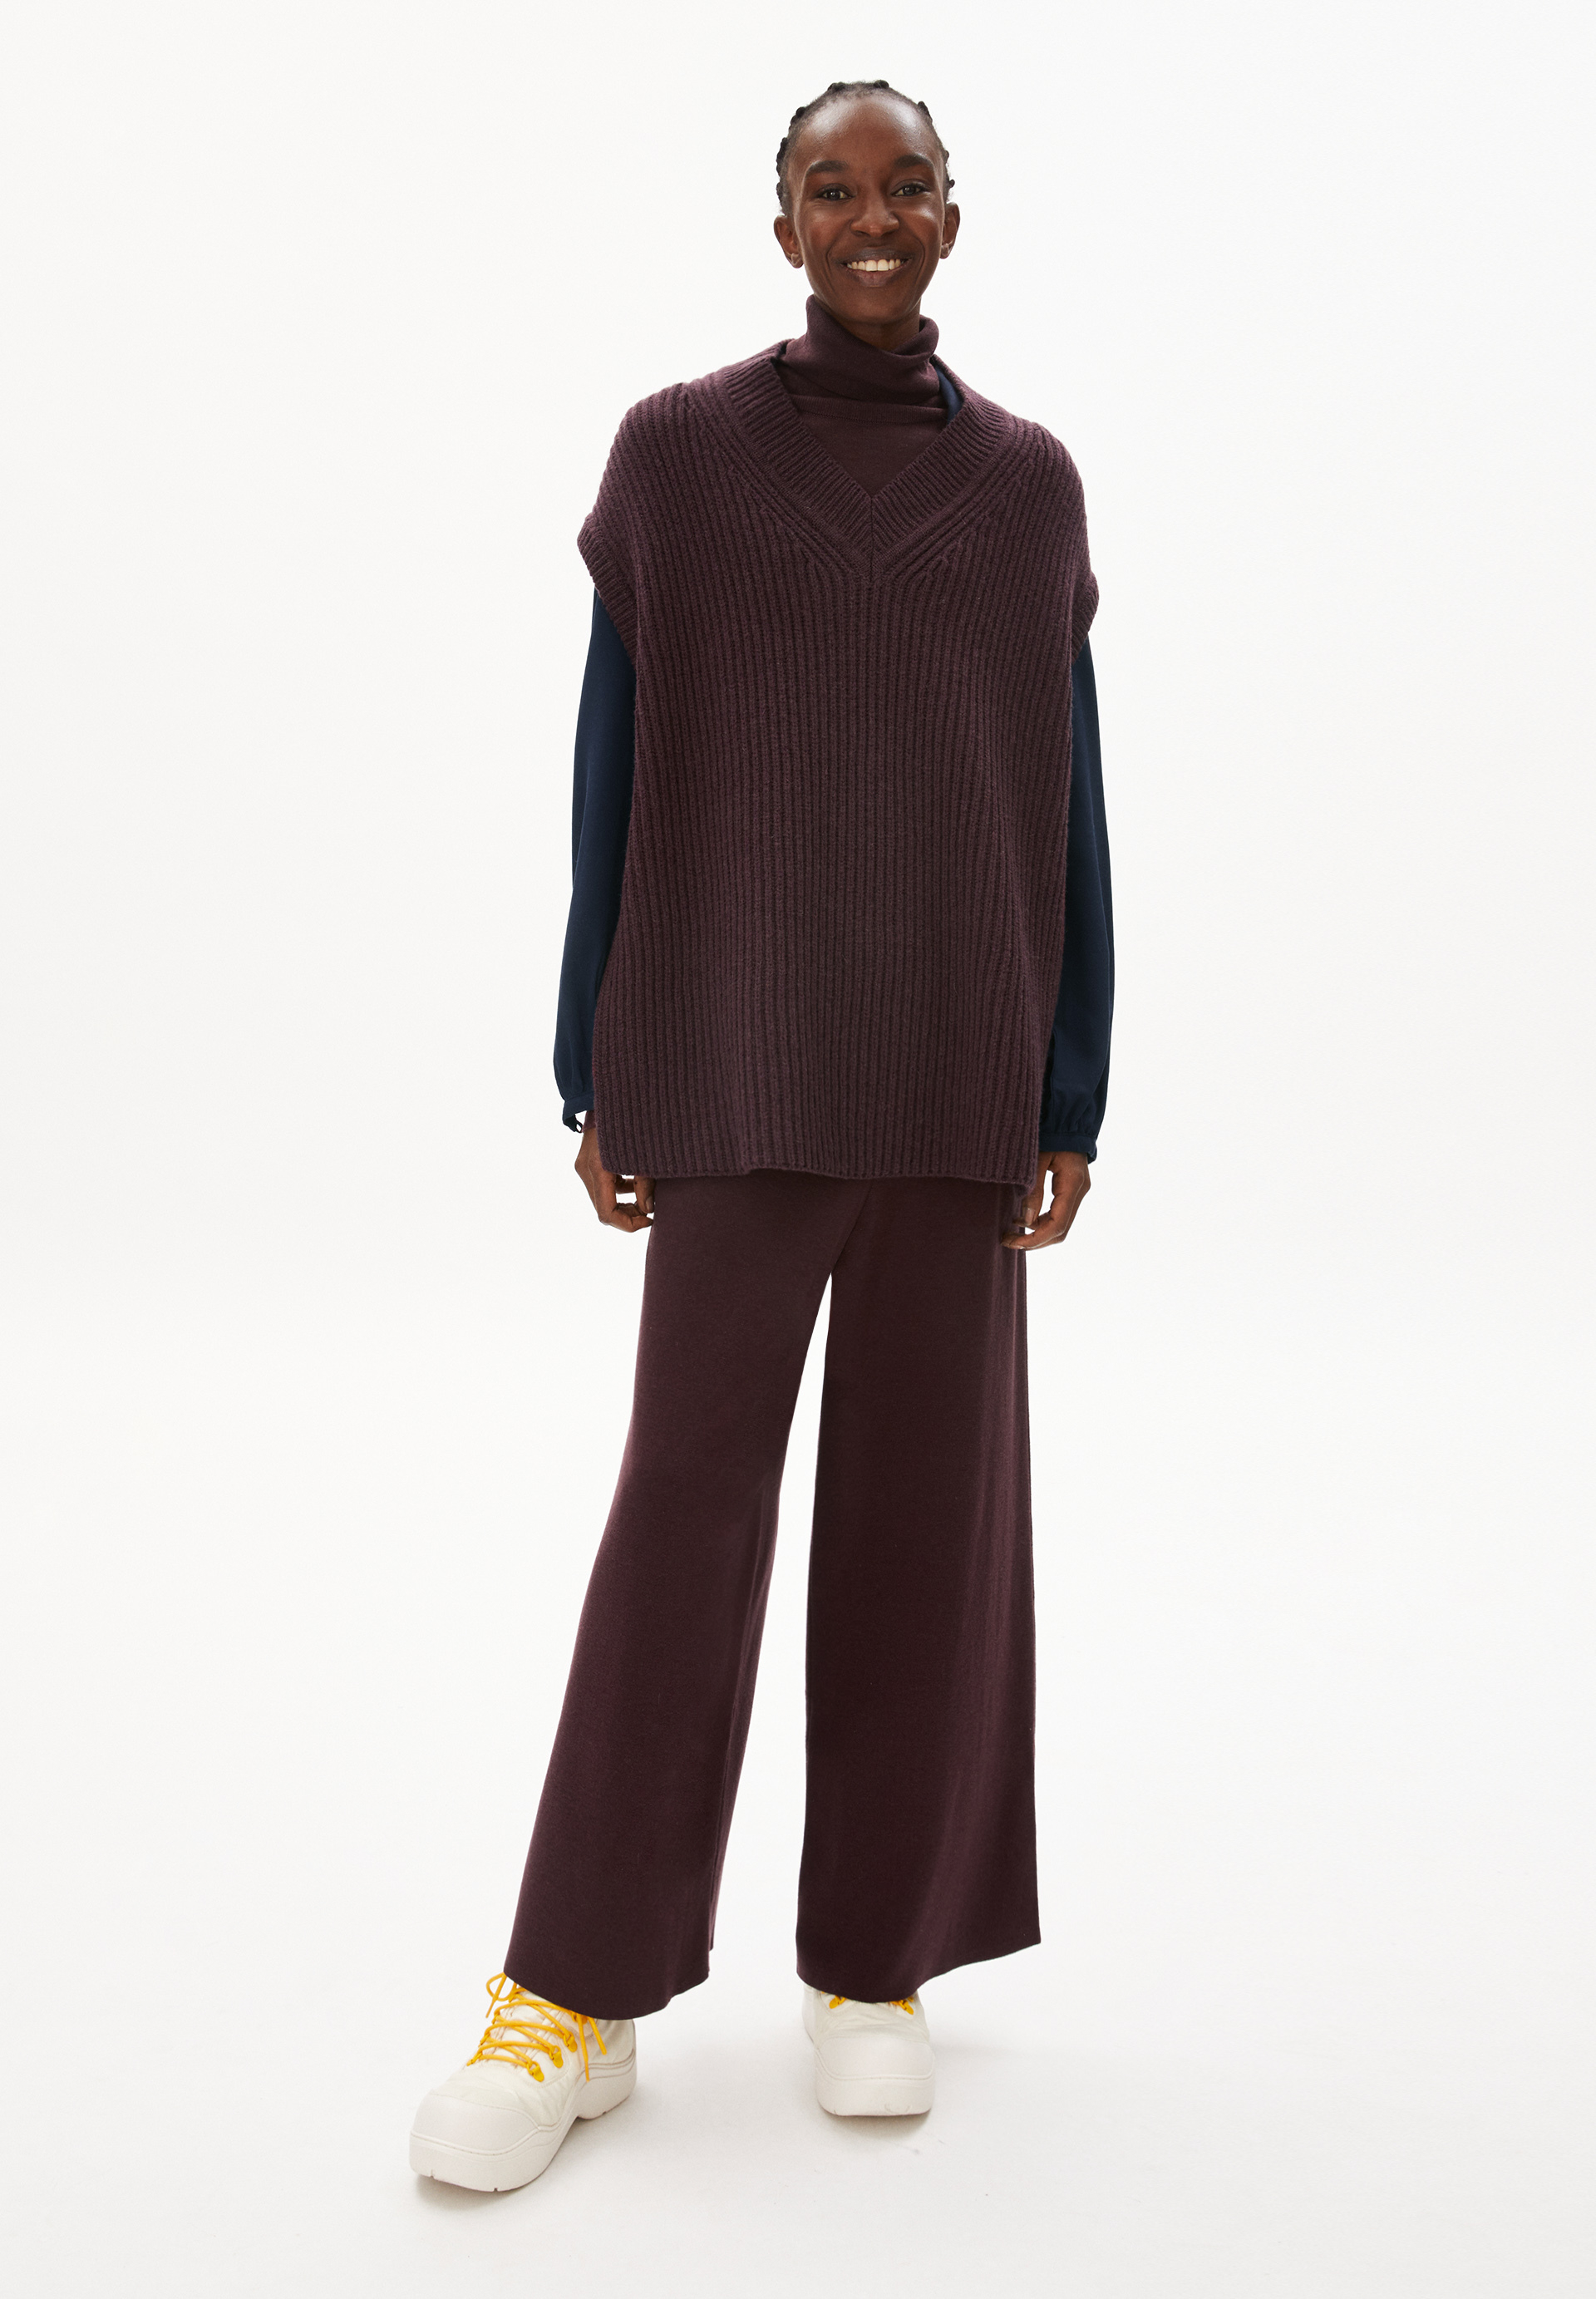 VIAA Knit Top Oversized Fit made of Organic Wool Mix